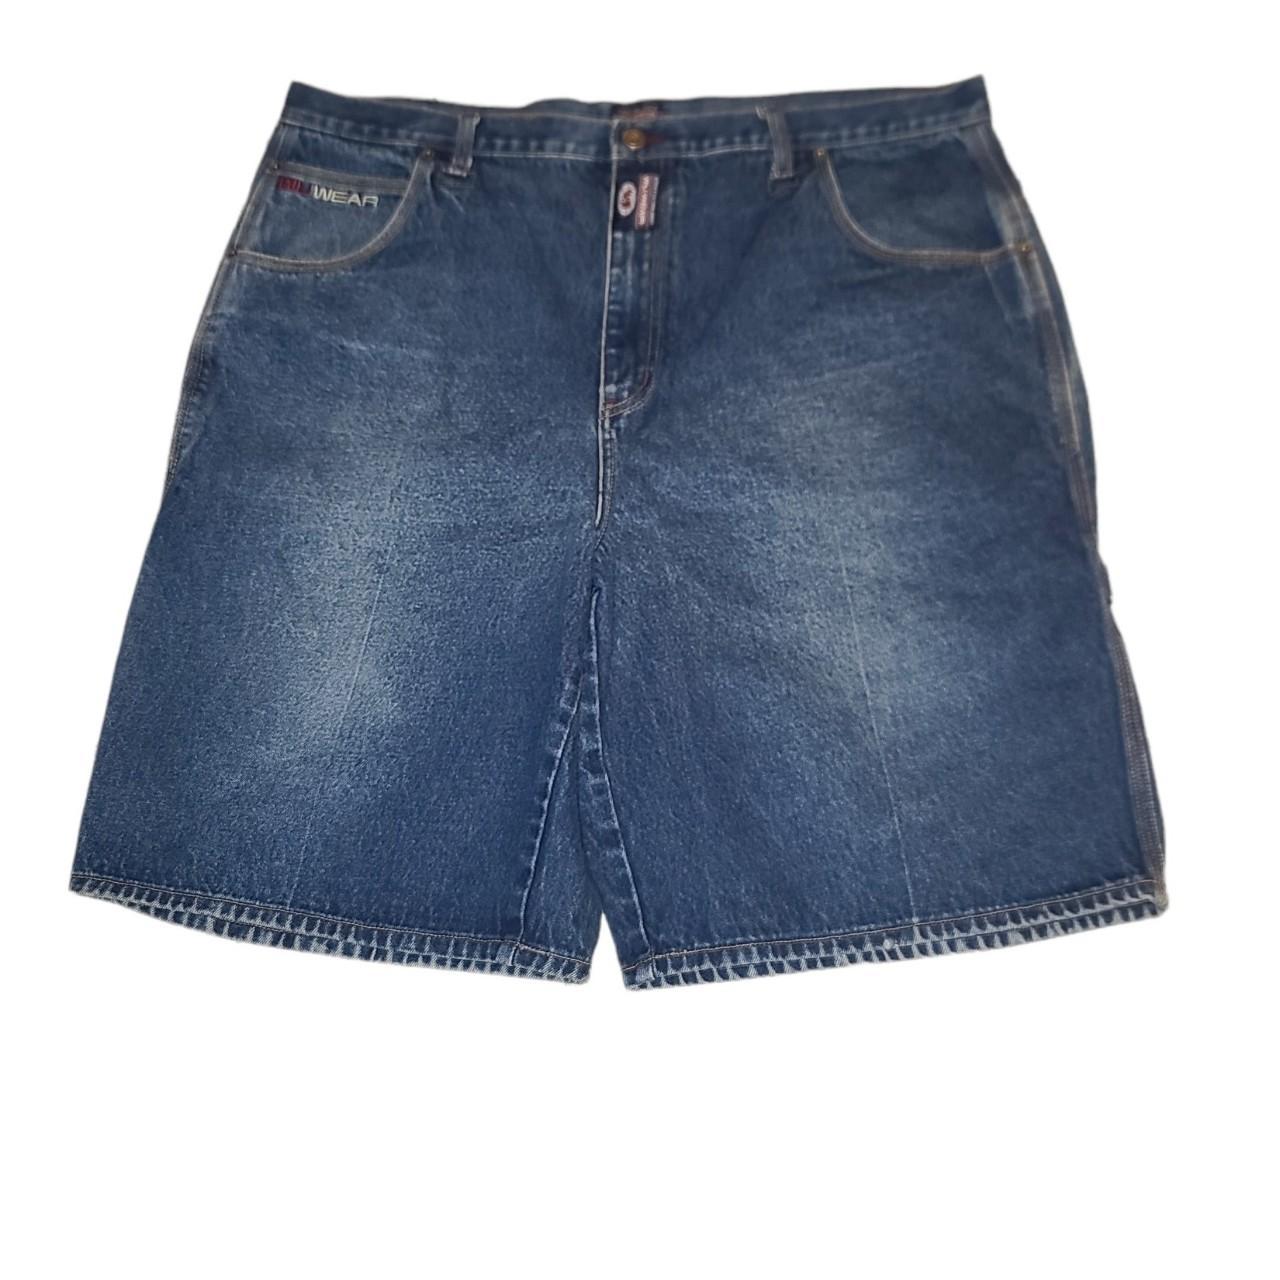 Wu Wear Men's Navy and Blue Shorts